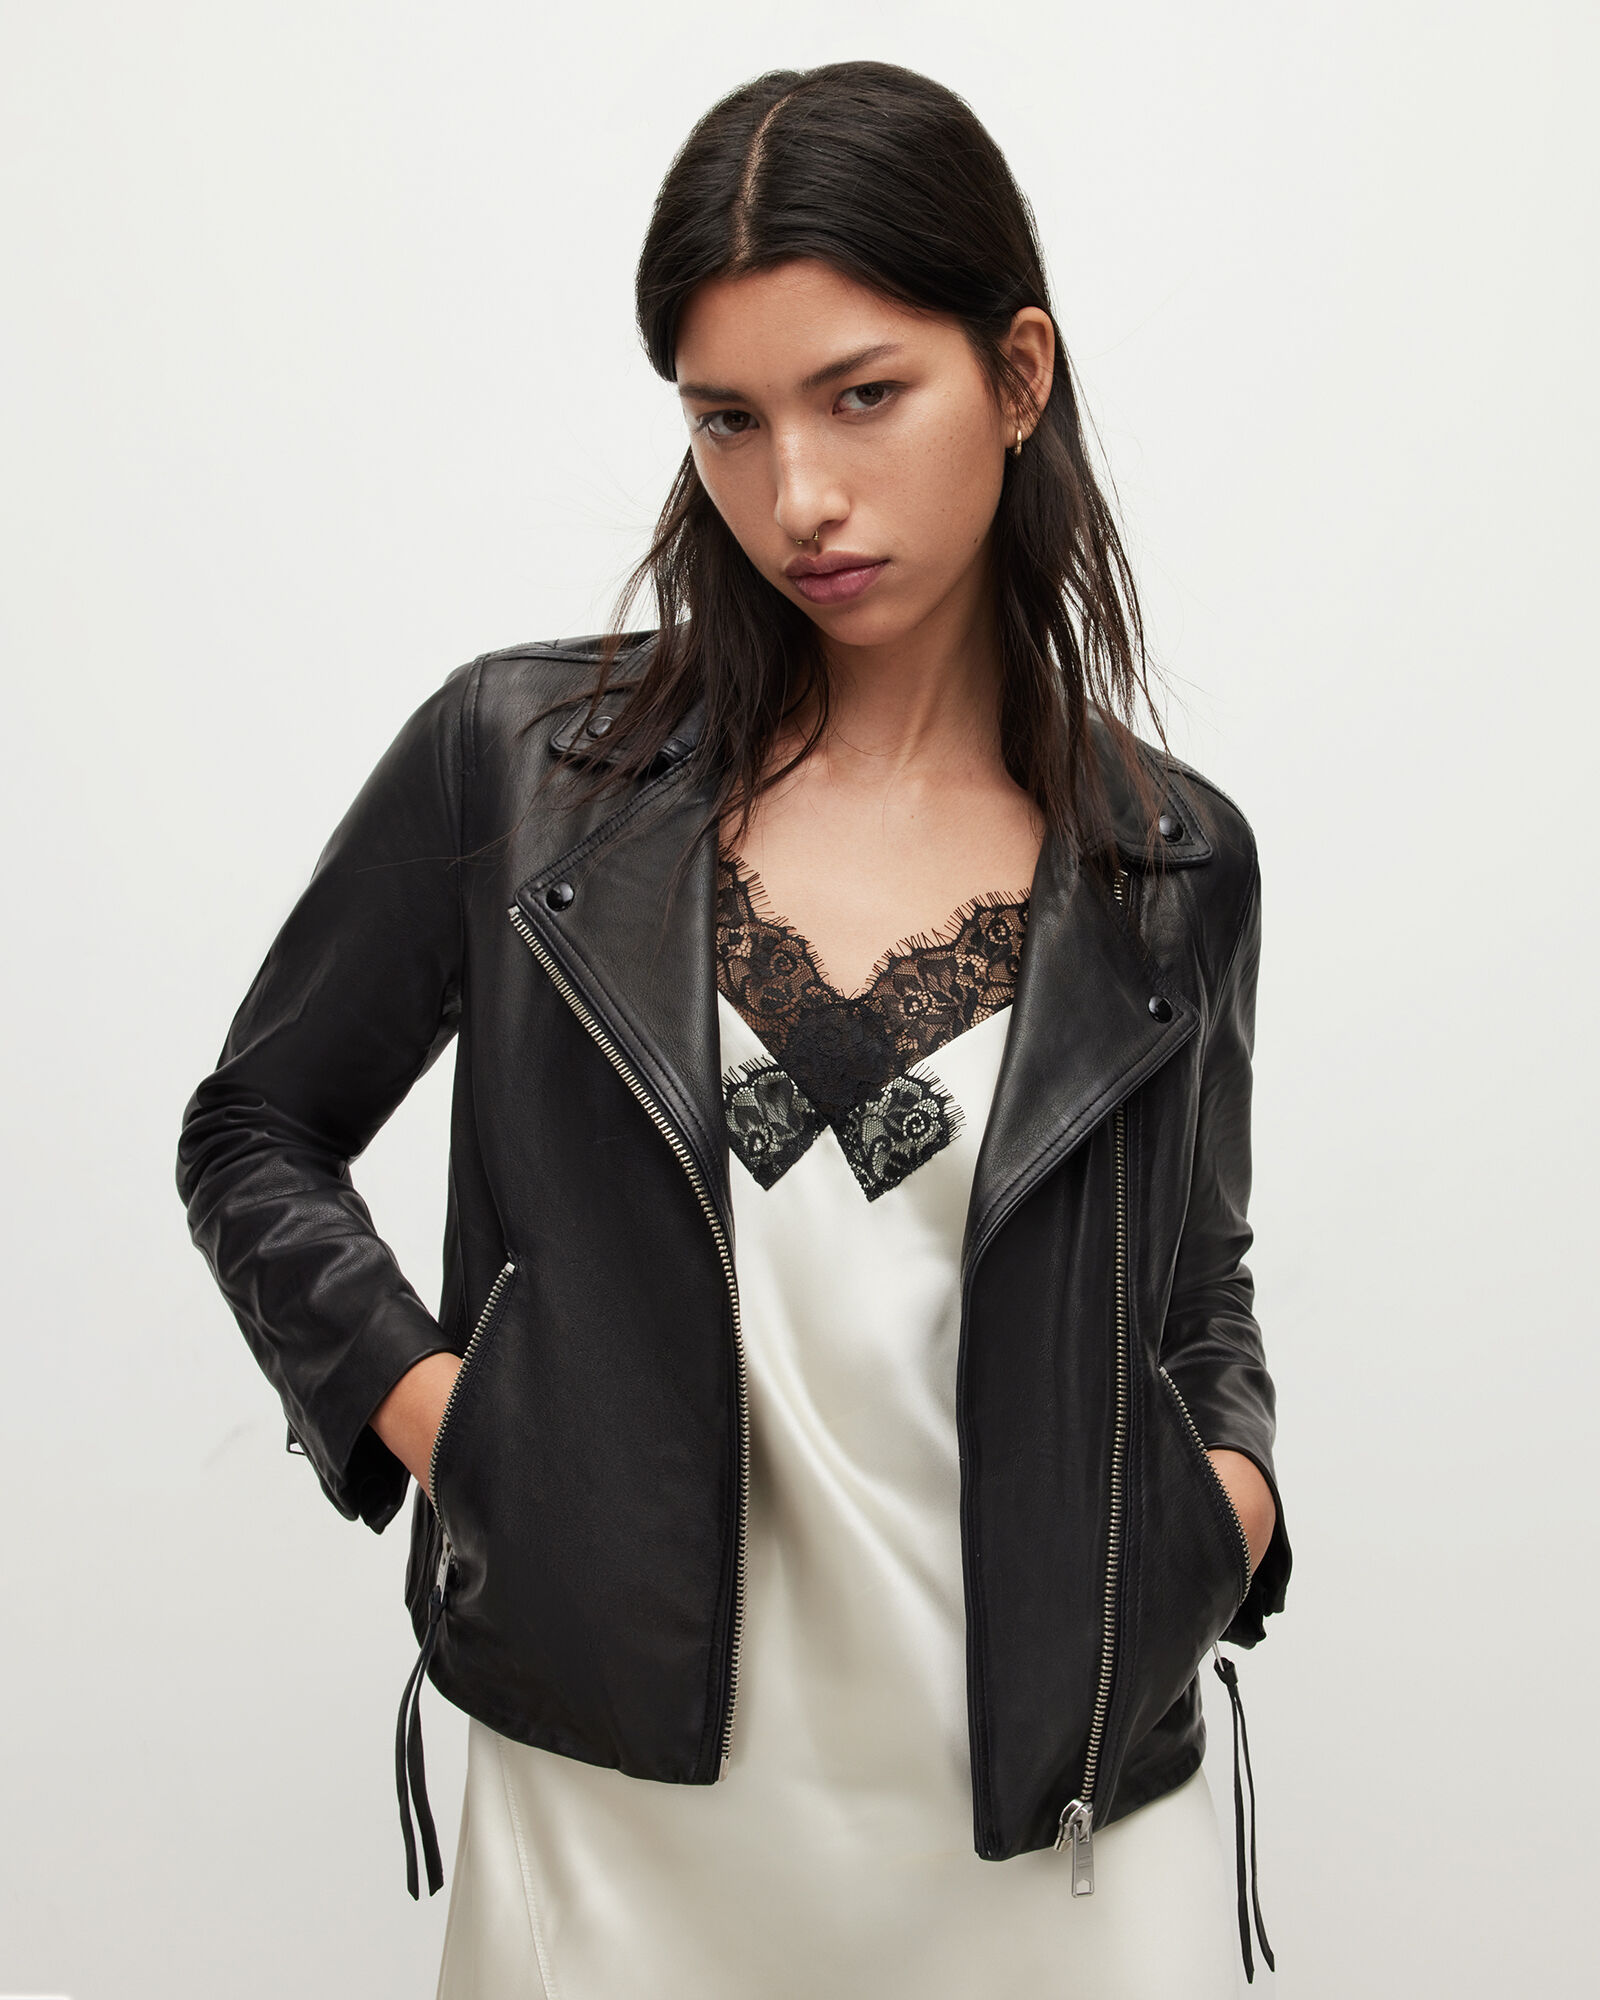 Women's Leather Clothing & Leather Outfits | ALLSAINTS